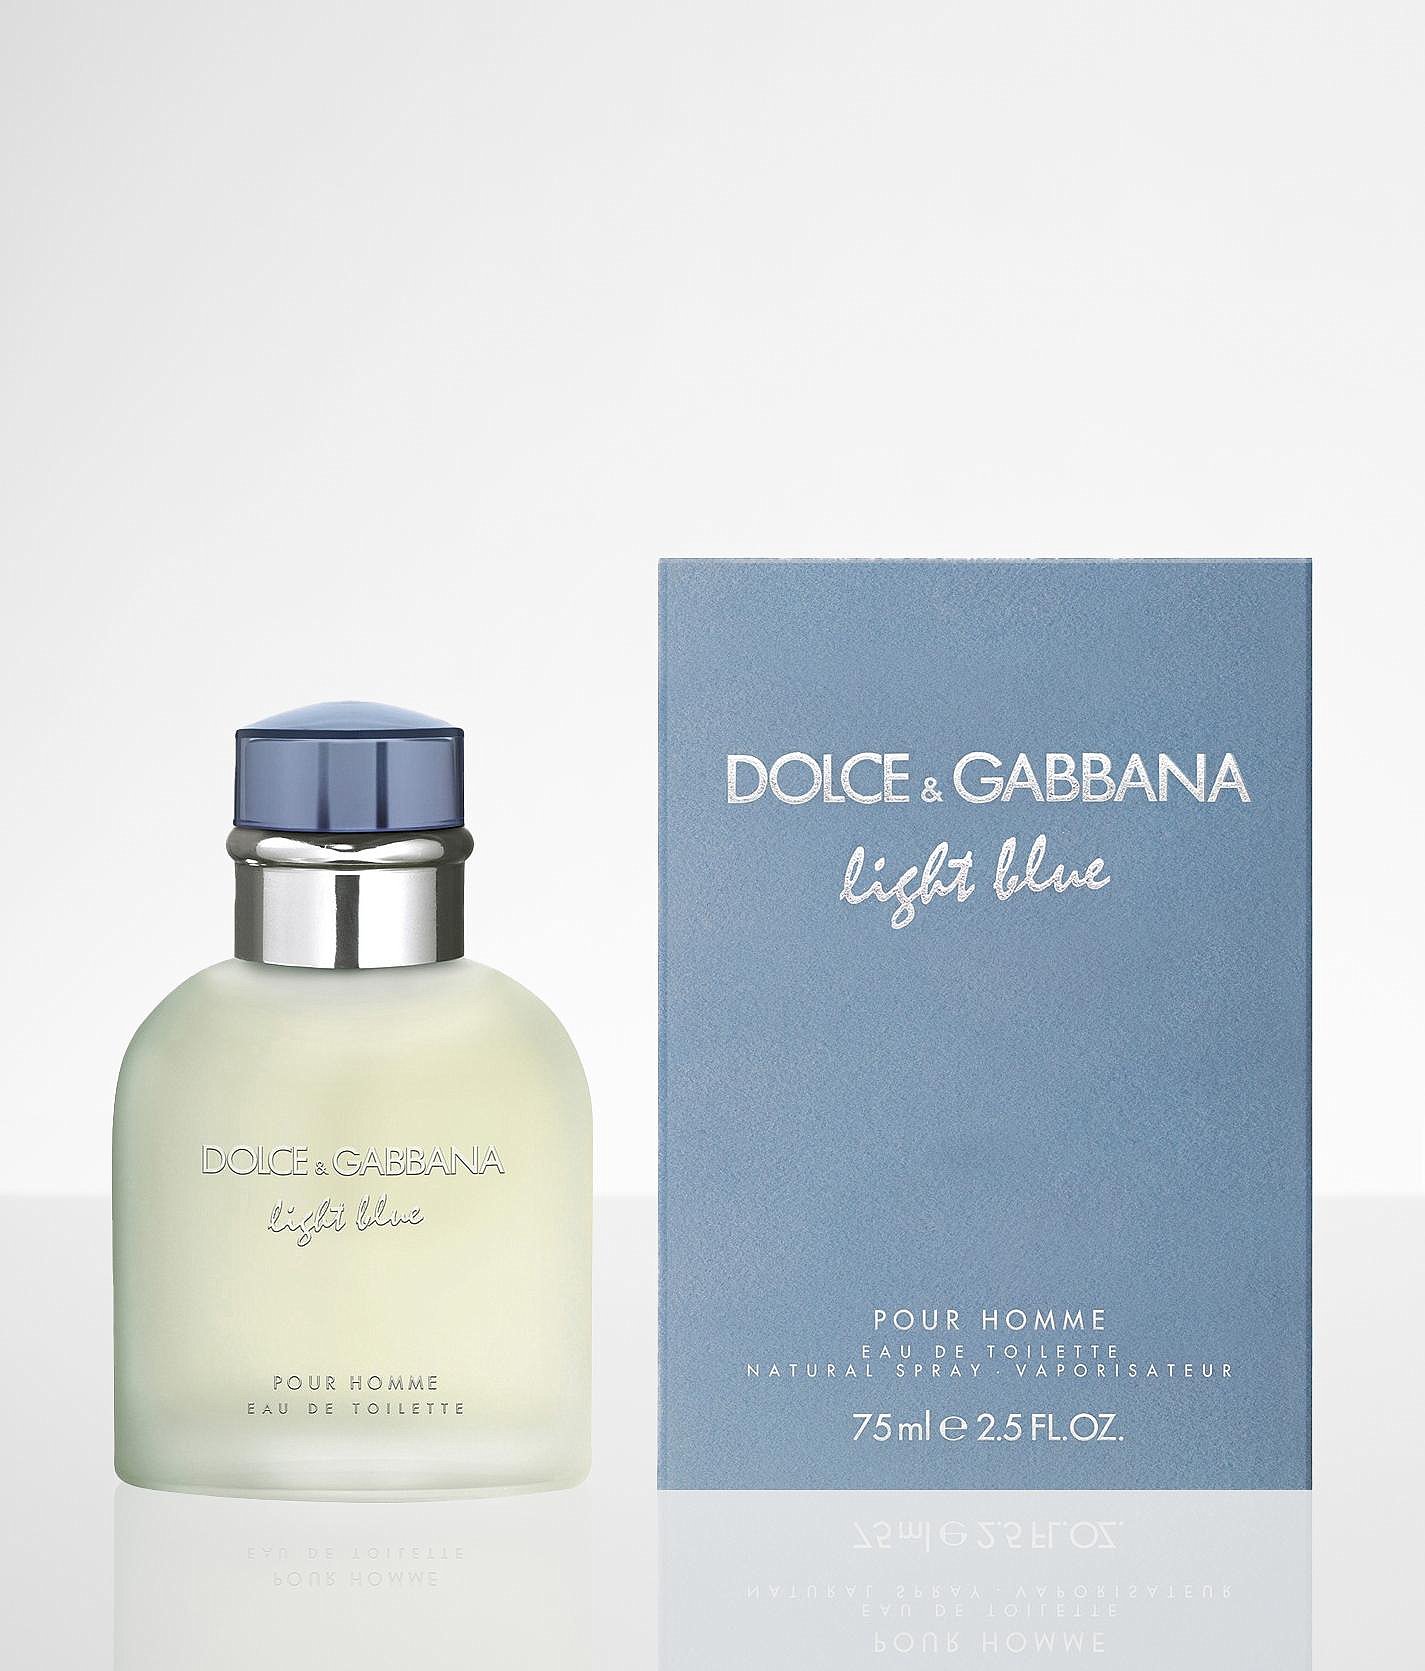 dolce and gabbana men's cologne pour homme